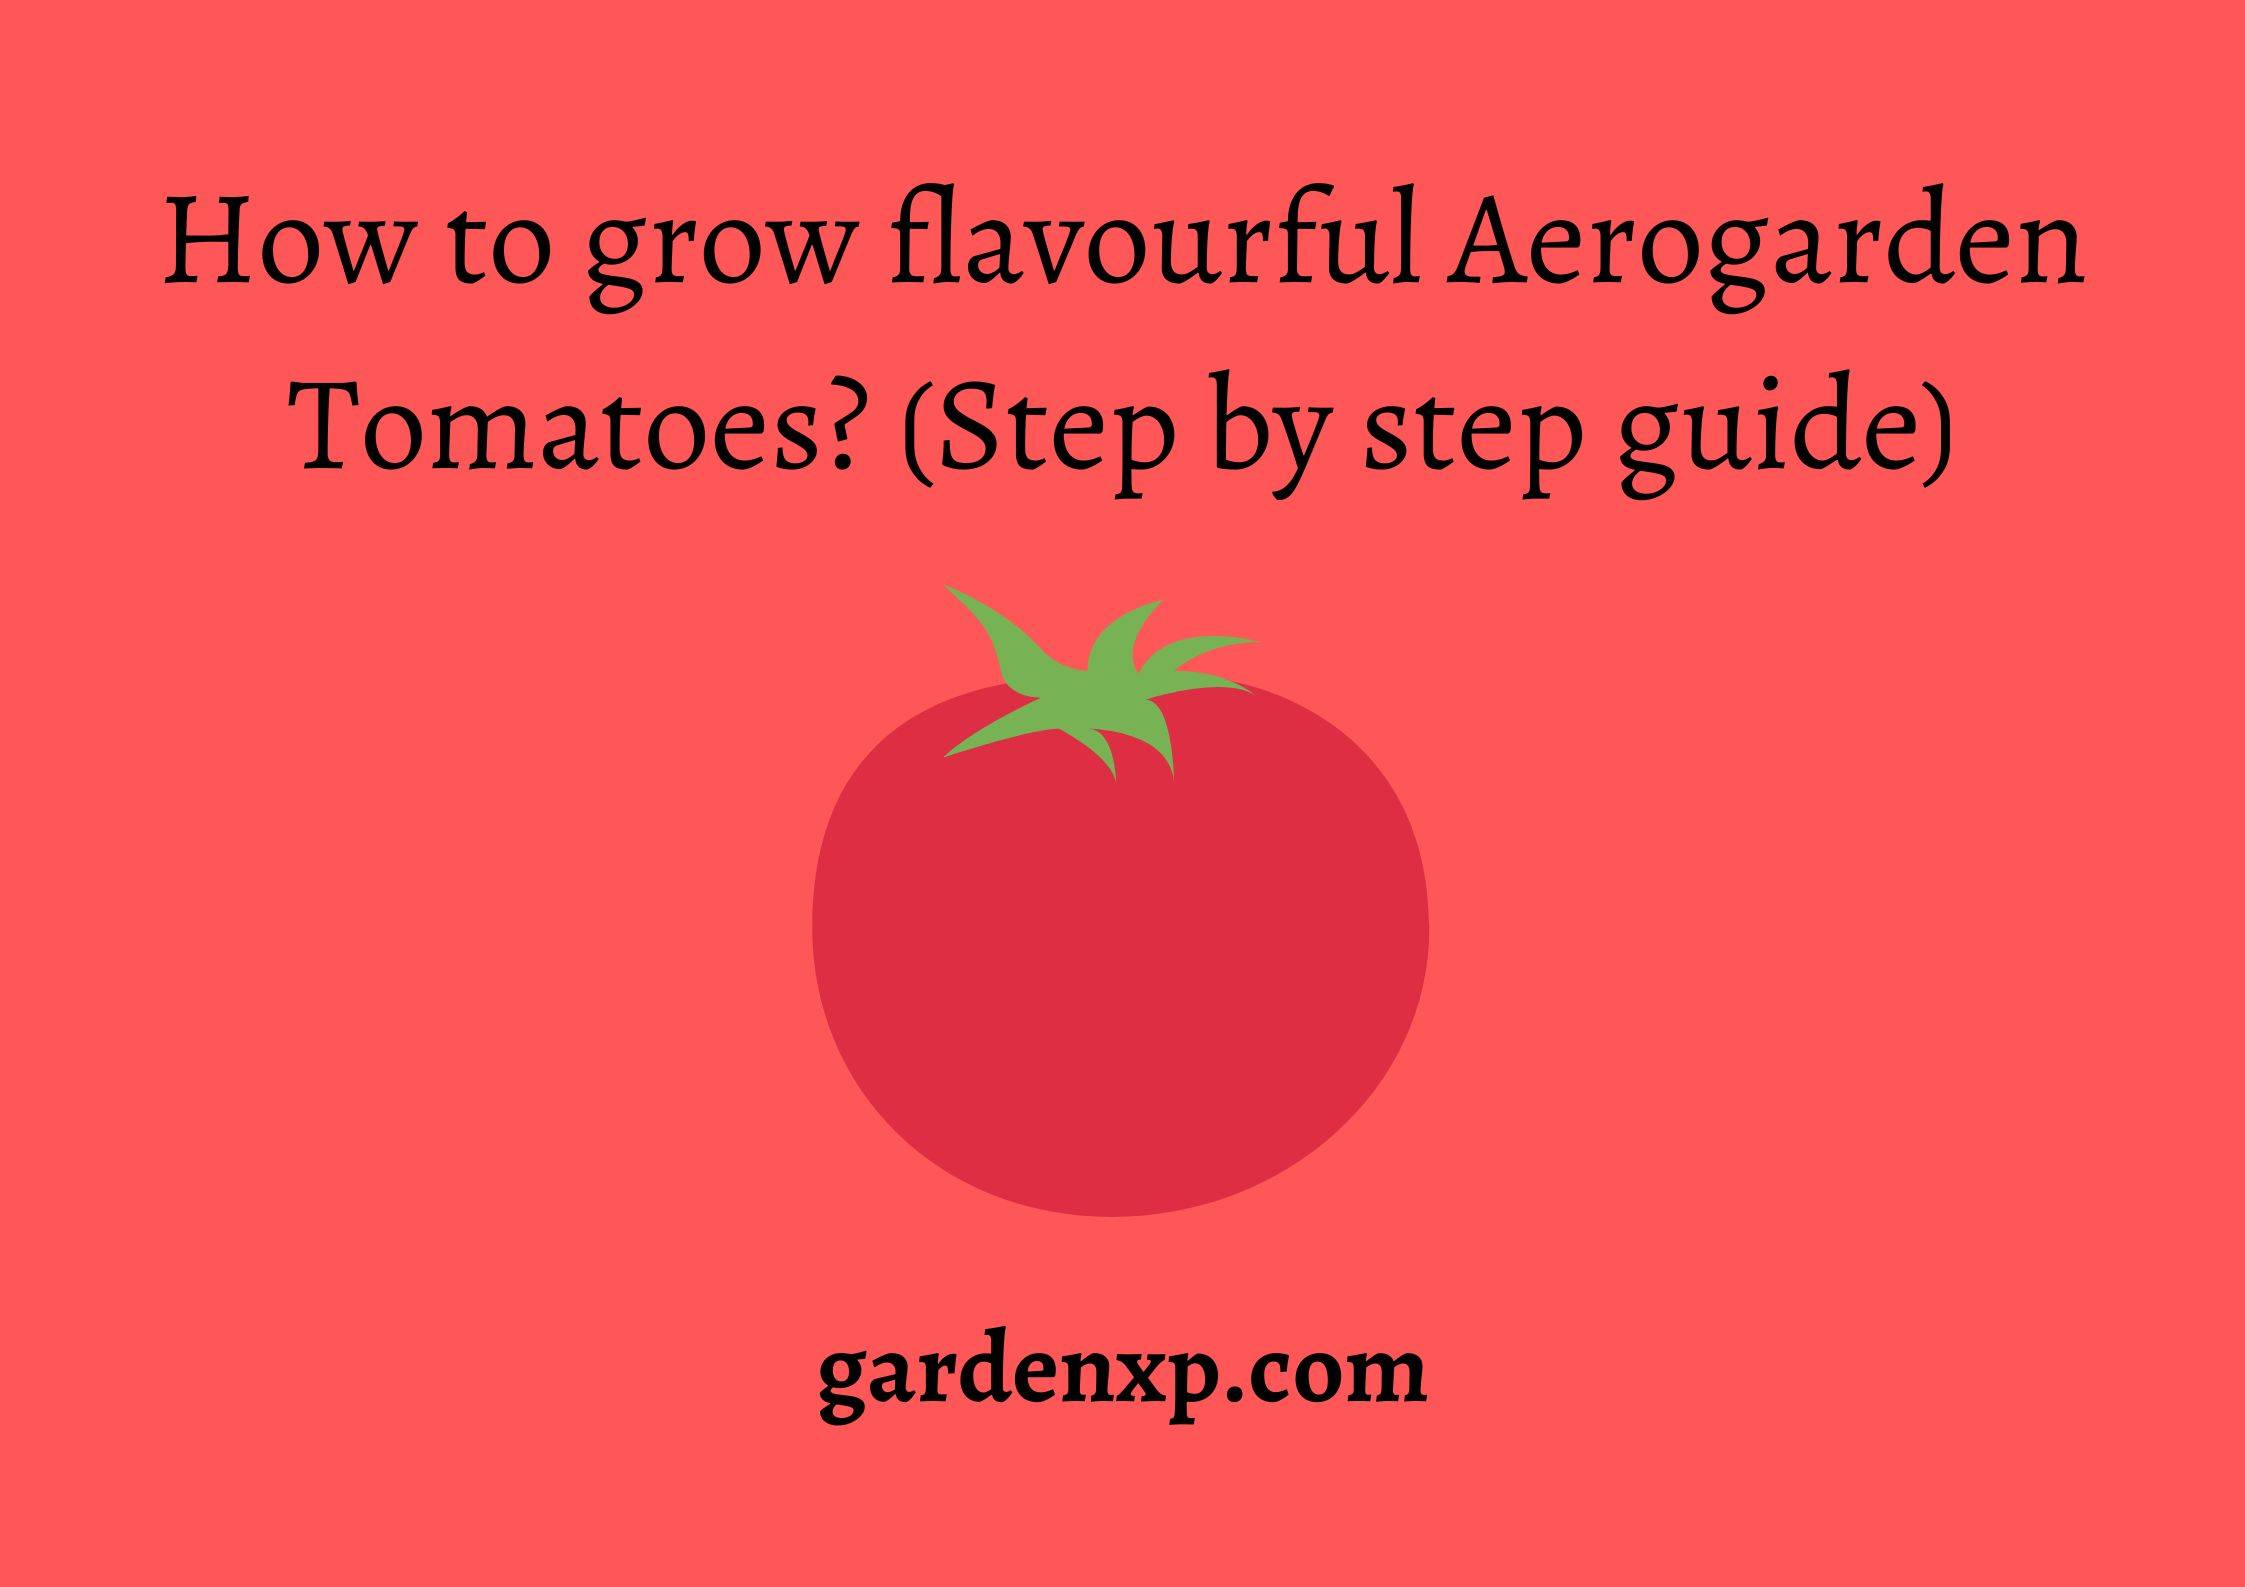 How to grow flavourful Aerogarden Tomatoes? (Step by step guide)